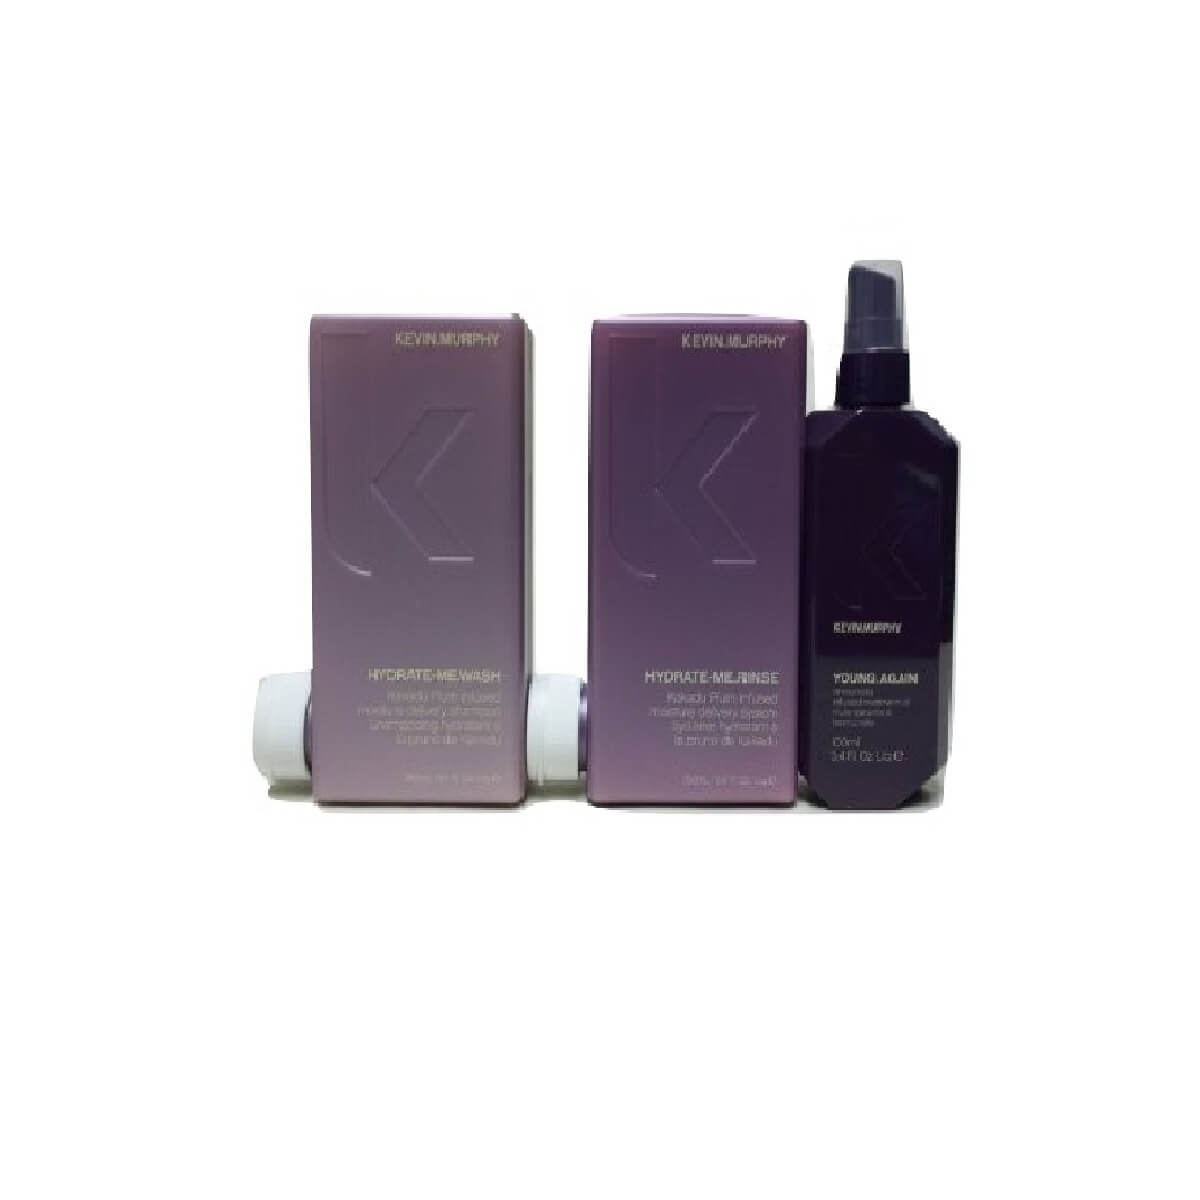 Kevin Murphy Young Again Wash And Rinse Duo 8.4 oz